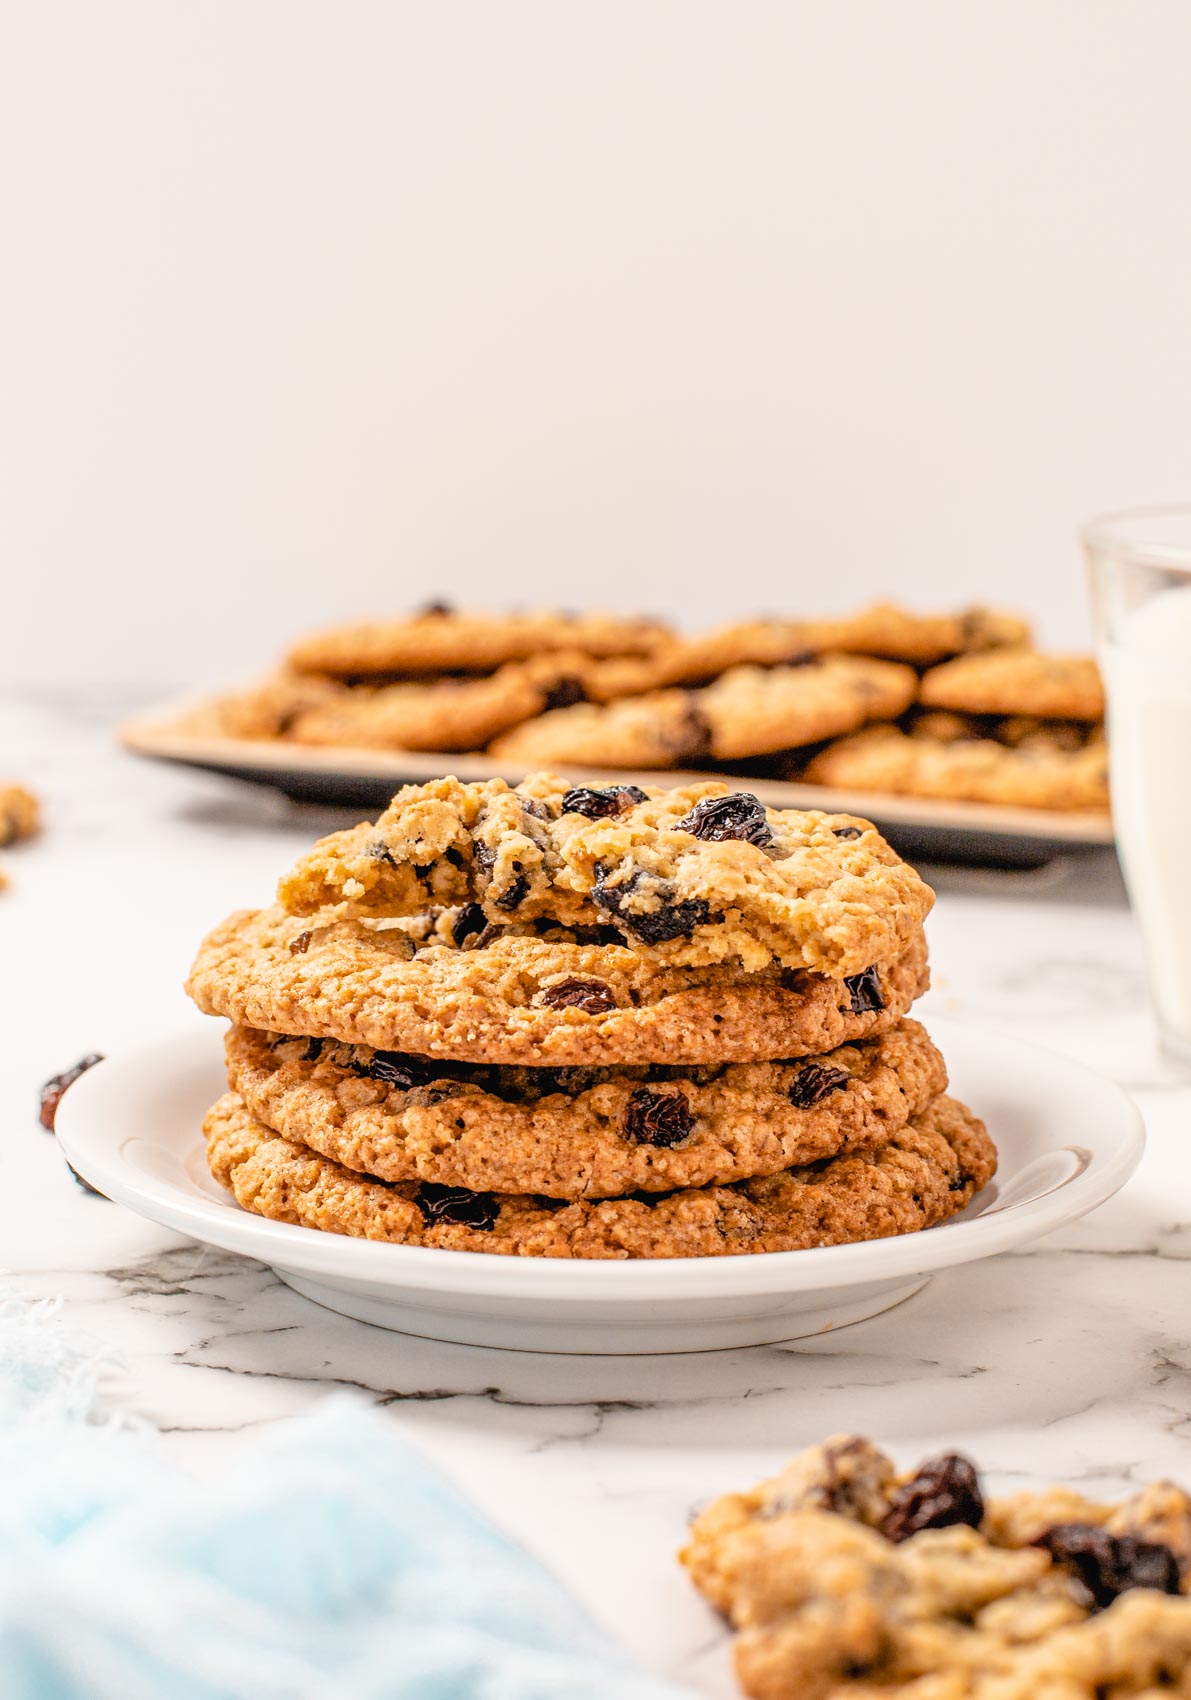 stack of cookies with one open, revealing the center